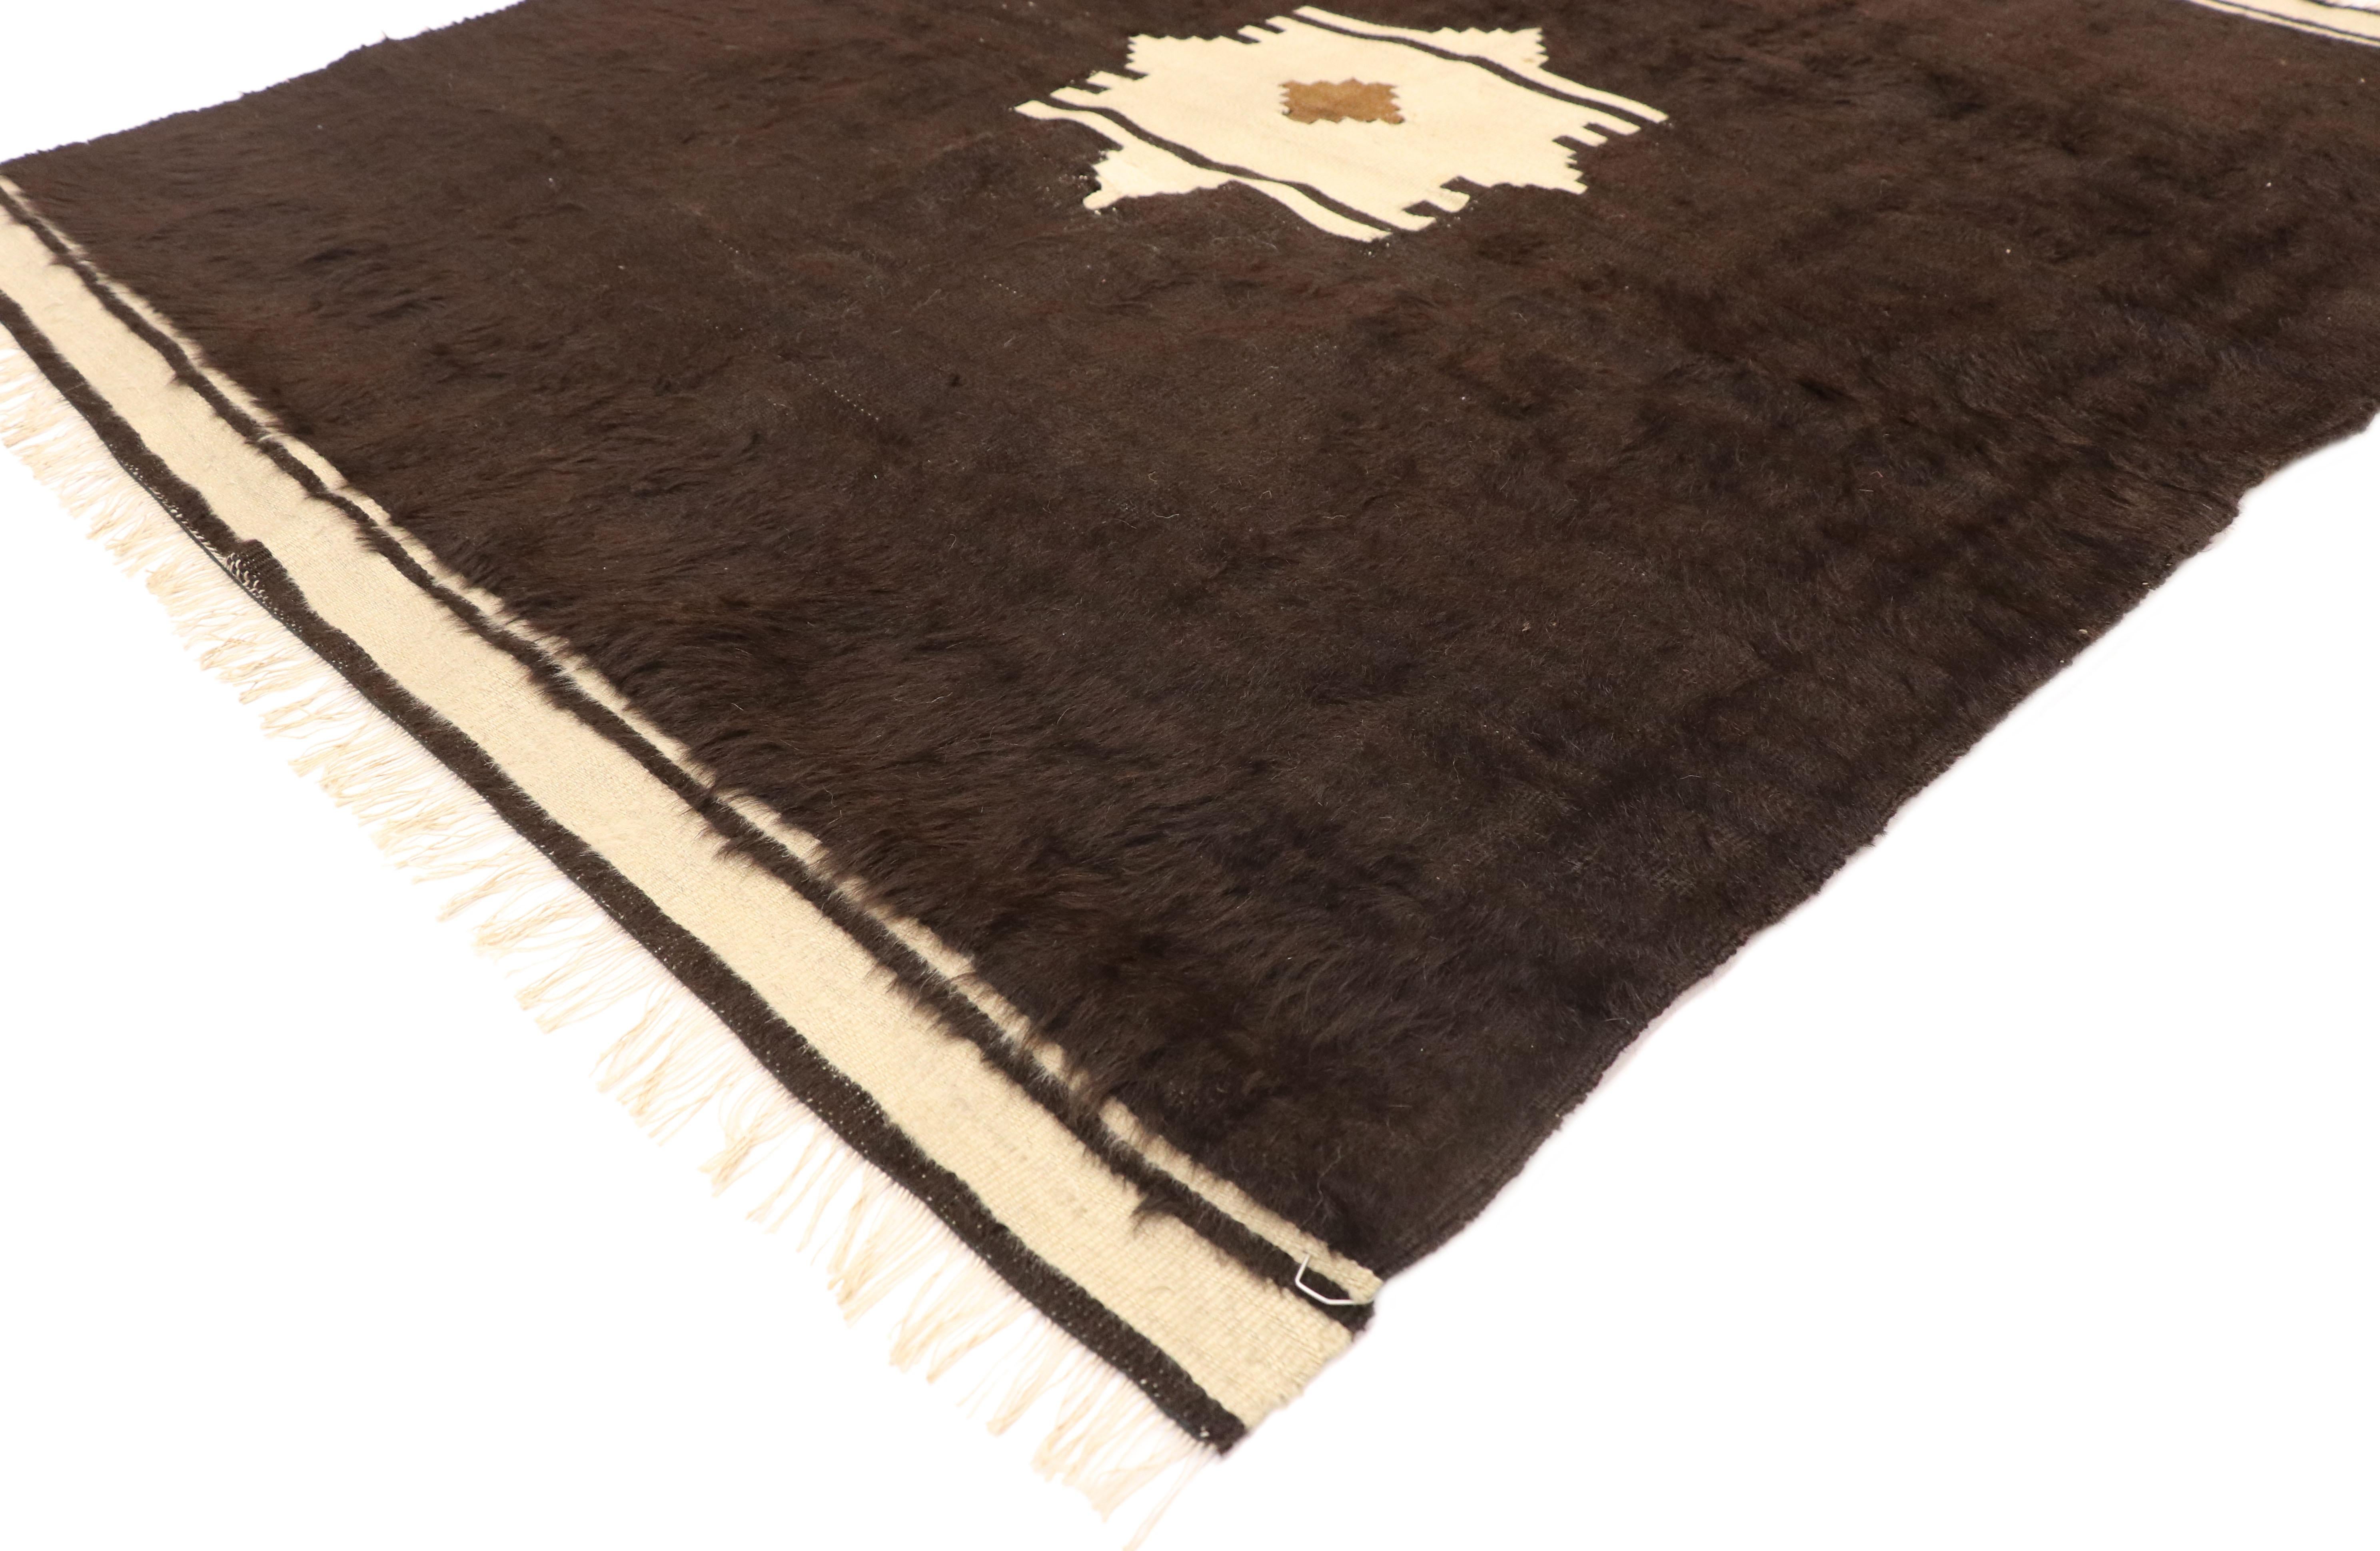 52848 vintage Turkish Angora Blanket rug with Mid-Century Modern style. With its minimalist design, plush texture, this vintage Turkish angora blanket rug is a captivating vision of woven beauty. It features an Anatolian star medallion floating in